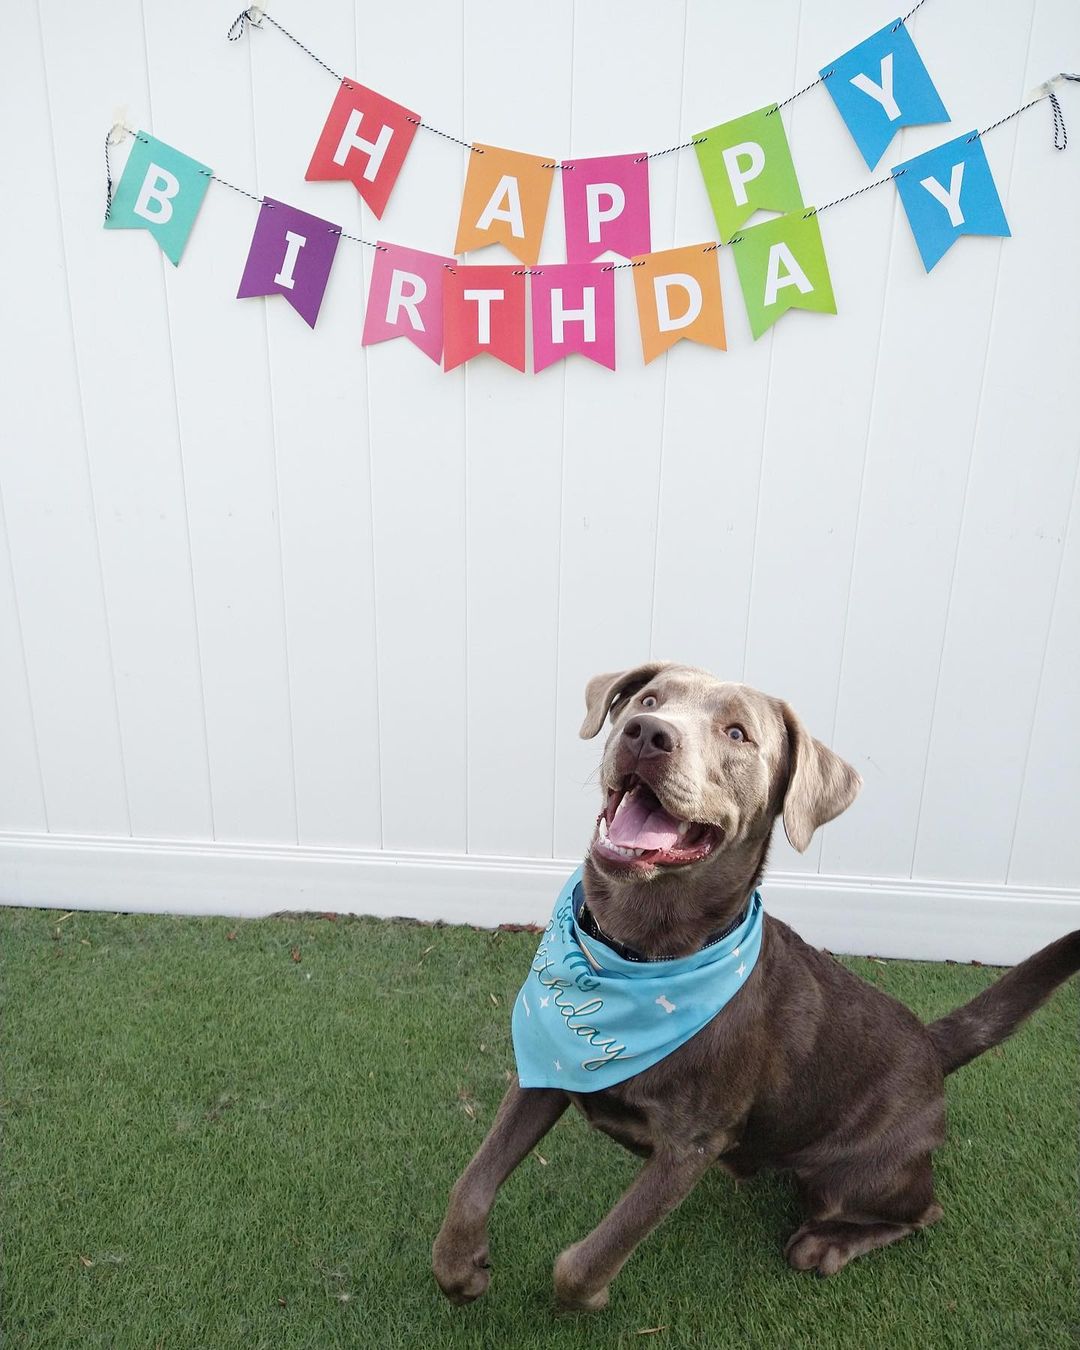 Happy first birthday to Hakoda! 🥳 thanks for spending it with us bud, hope it’s a good one!